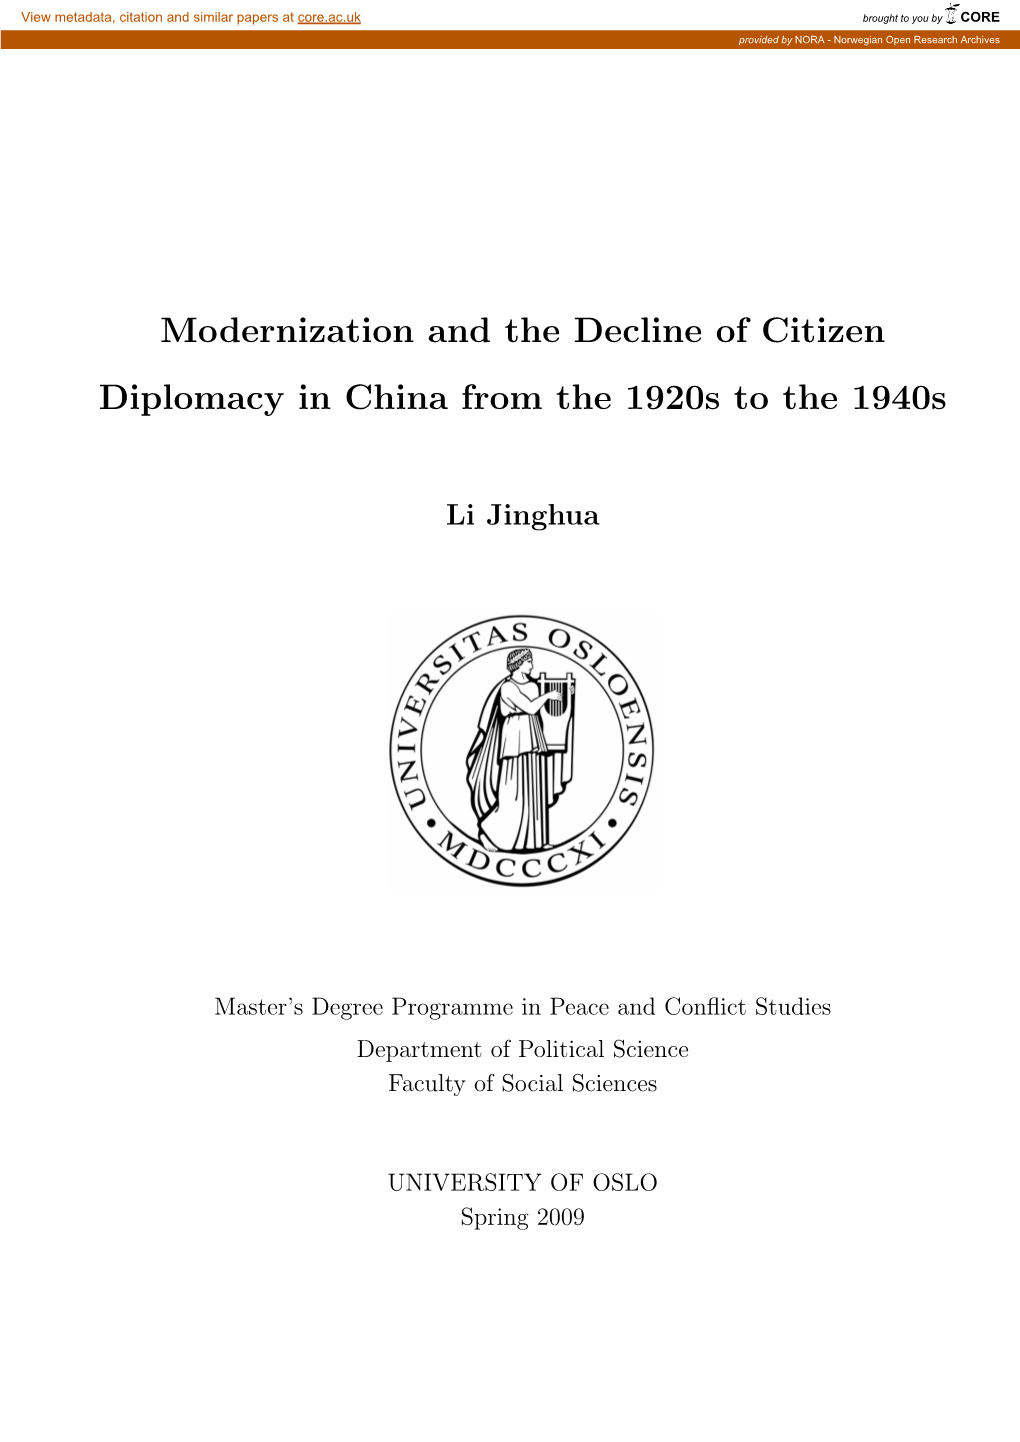 Modernization and the Decline of Citizen Diplomacy in China from the 1920S to the 1940S